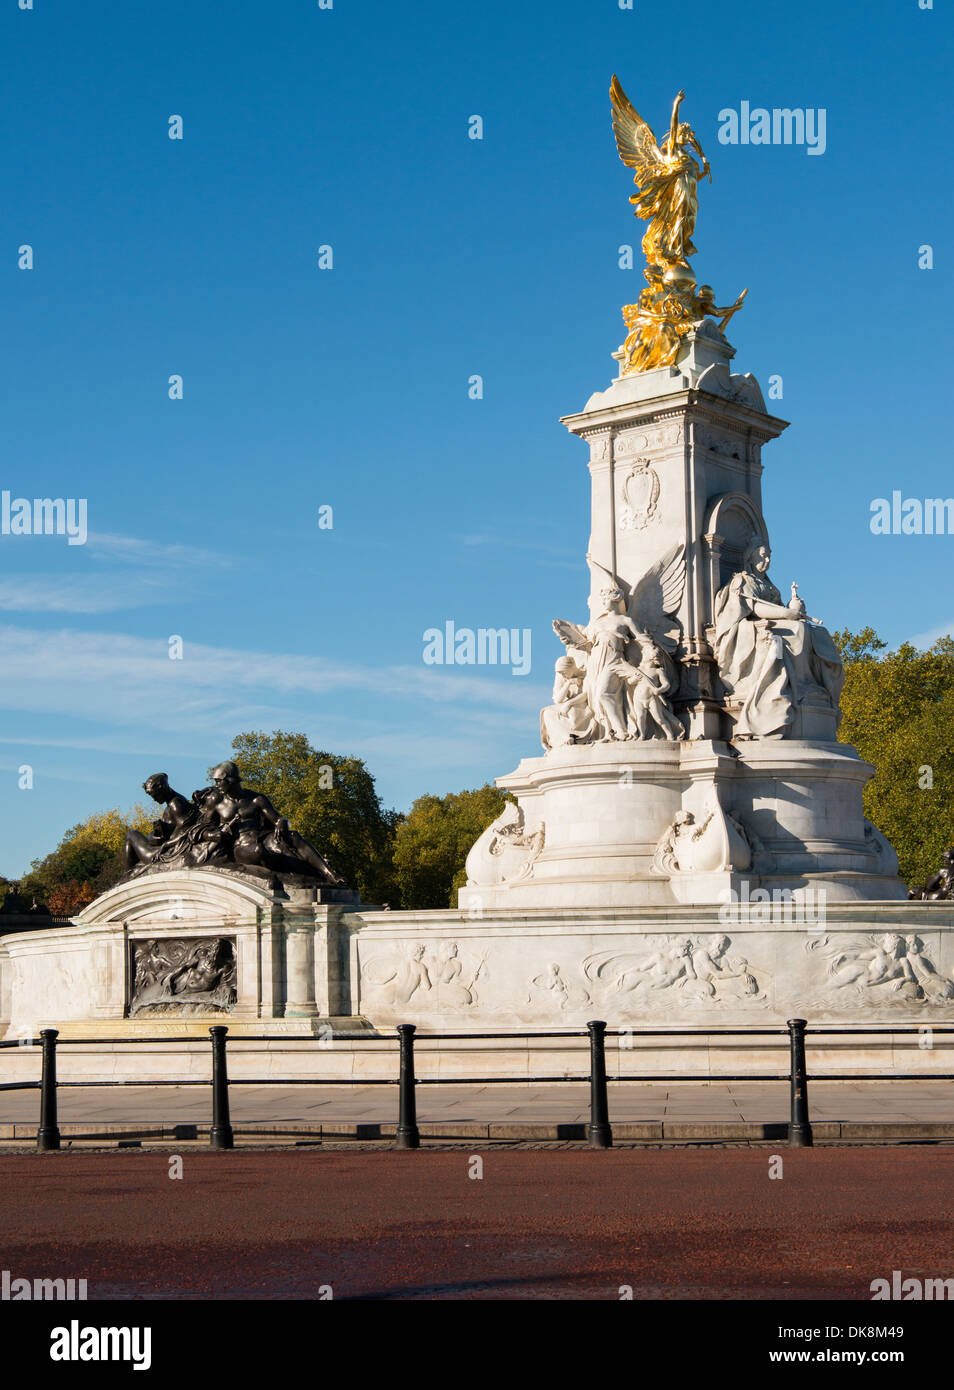 Statue in front of the Buckingham palace. Stock Photo